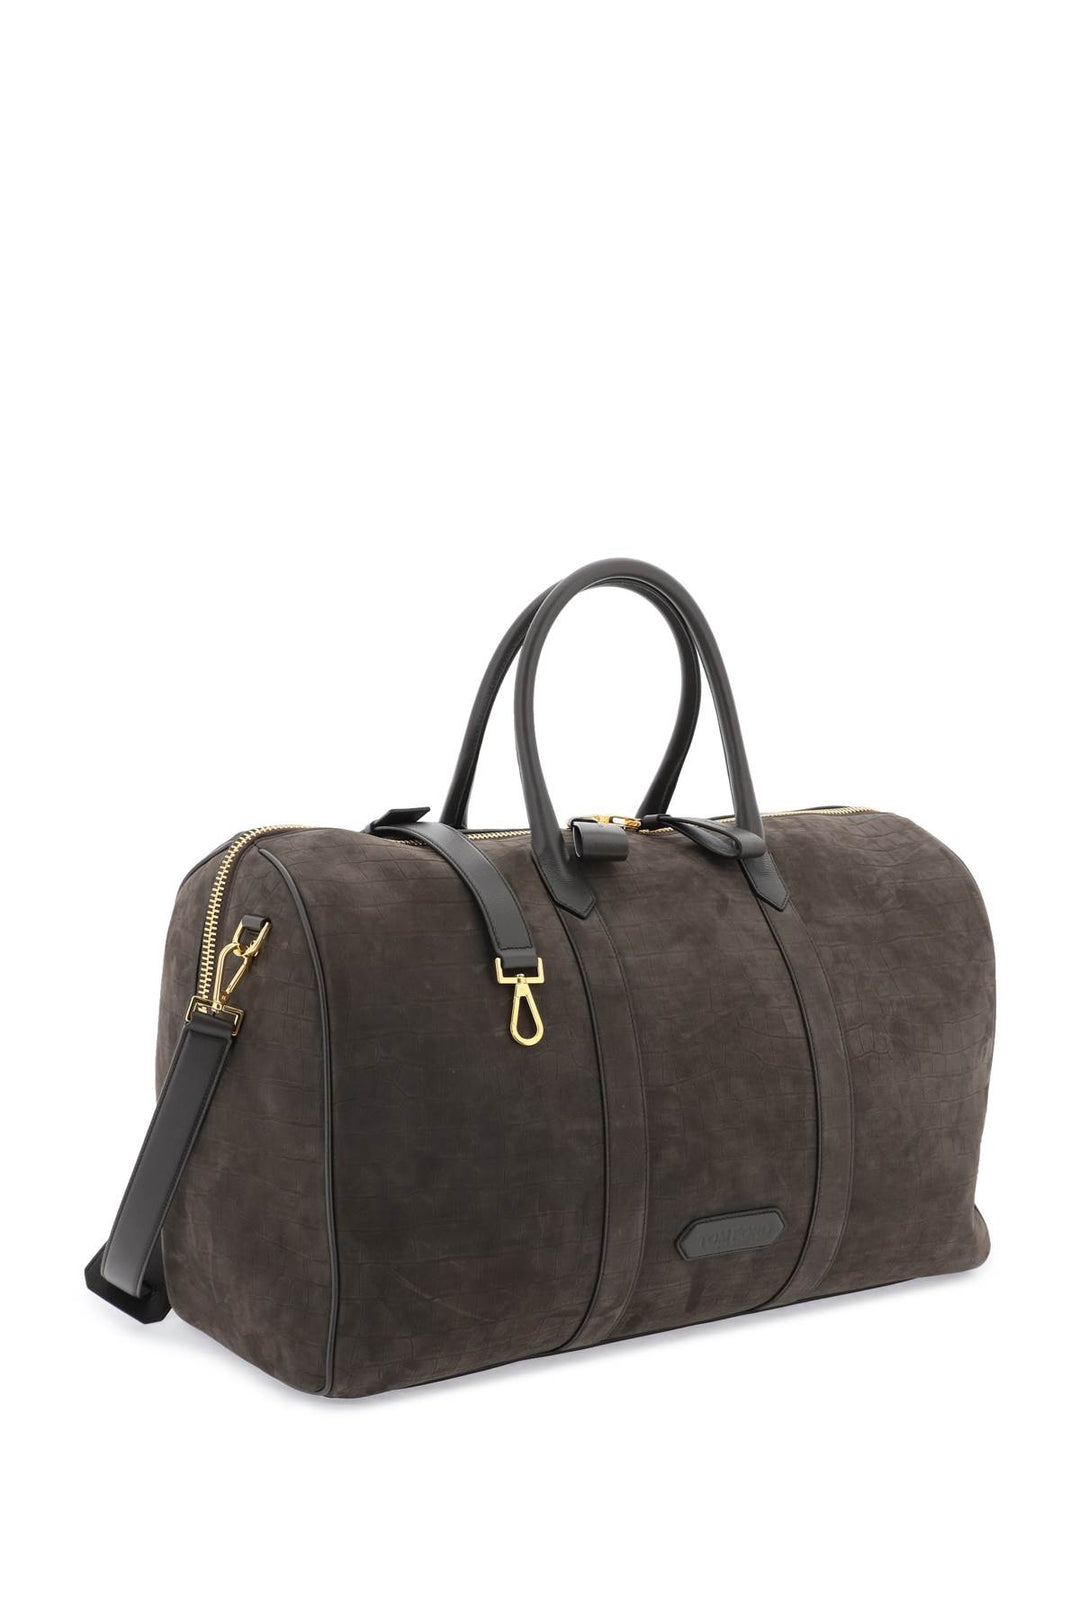 Tom ford suede duffle bag-2